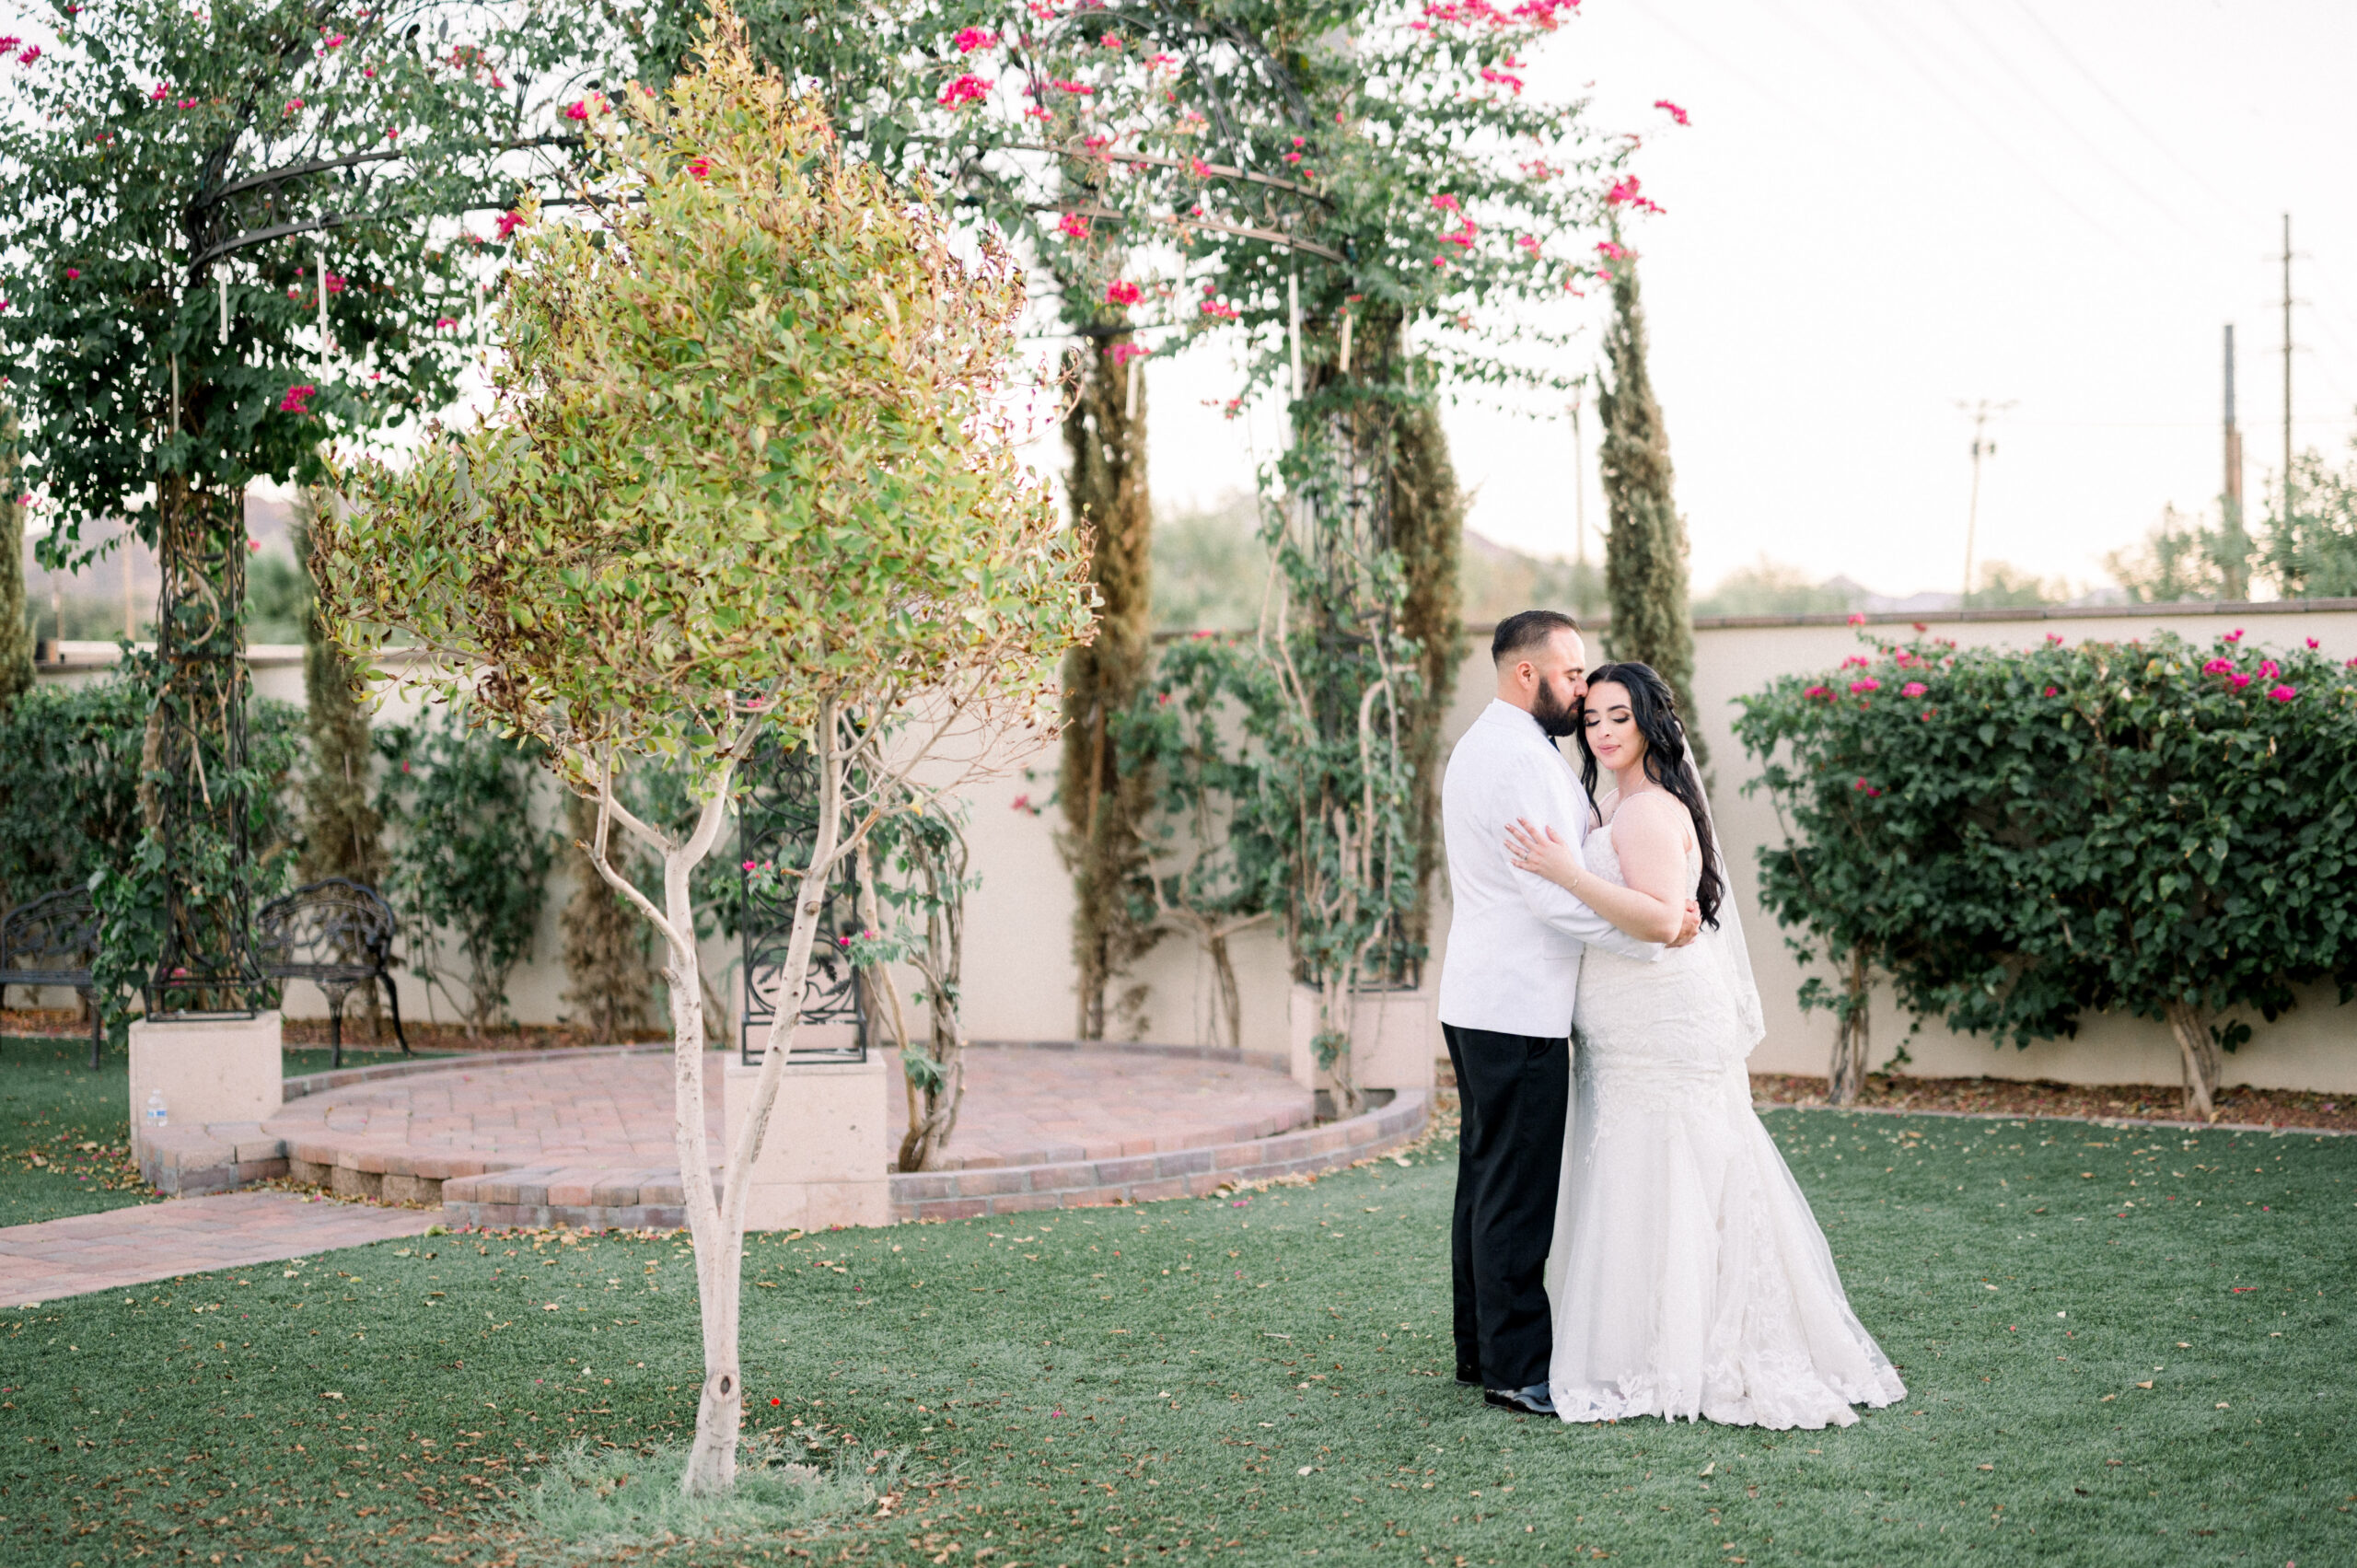 Ana and Daniel have one of the best love stories. It was finally time for them after over 10 years together to have their timeless Phoenix Summer Wedding.